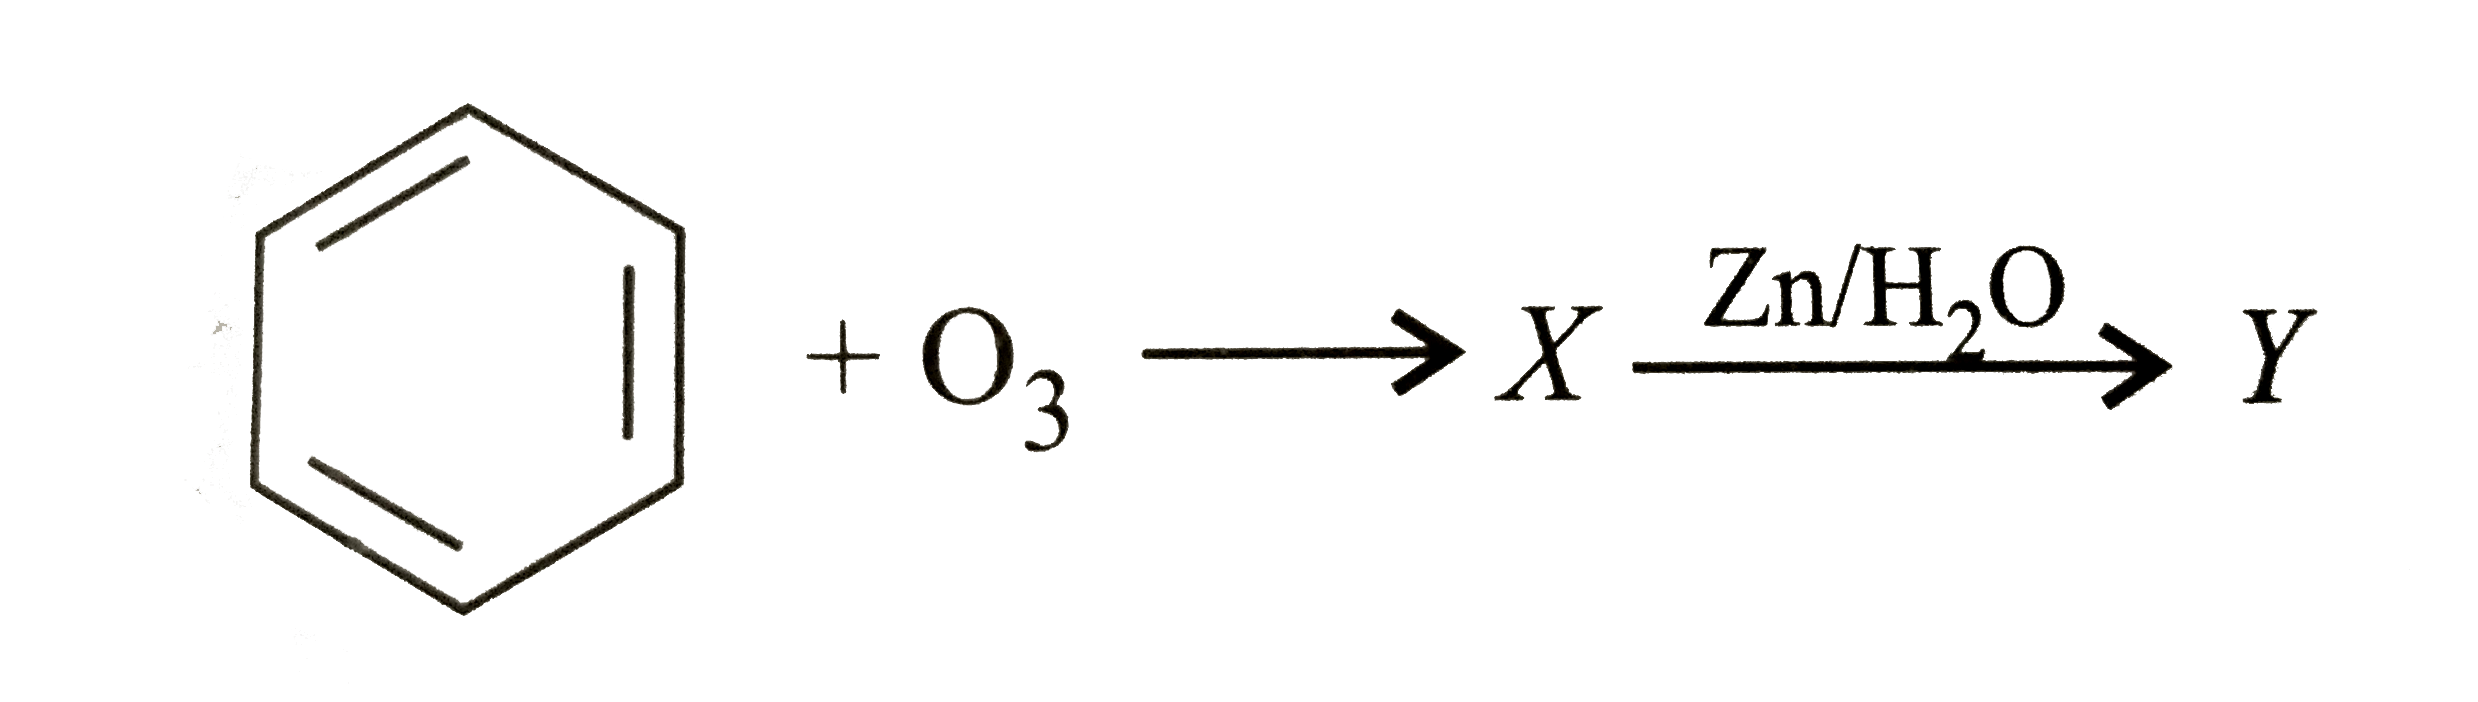 similar to alkenes and alkynes benzene also undergoes ozonolysis. In the sequence of the given reaction identify X and Y.